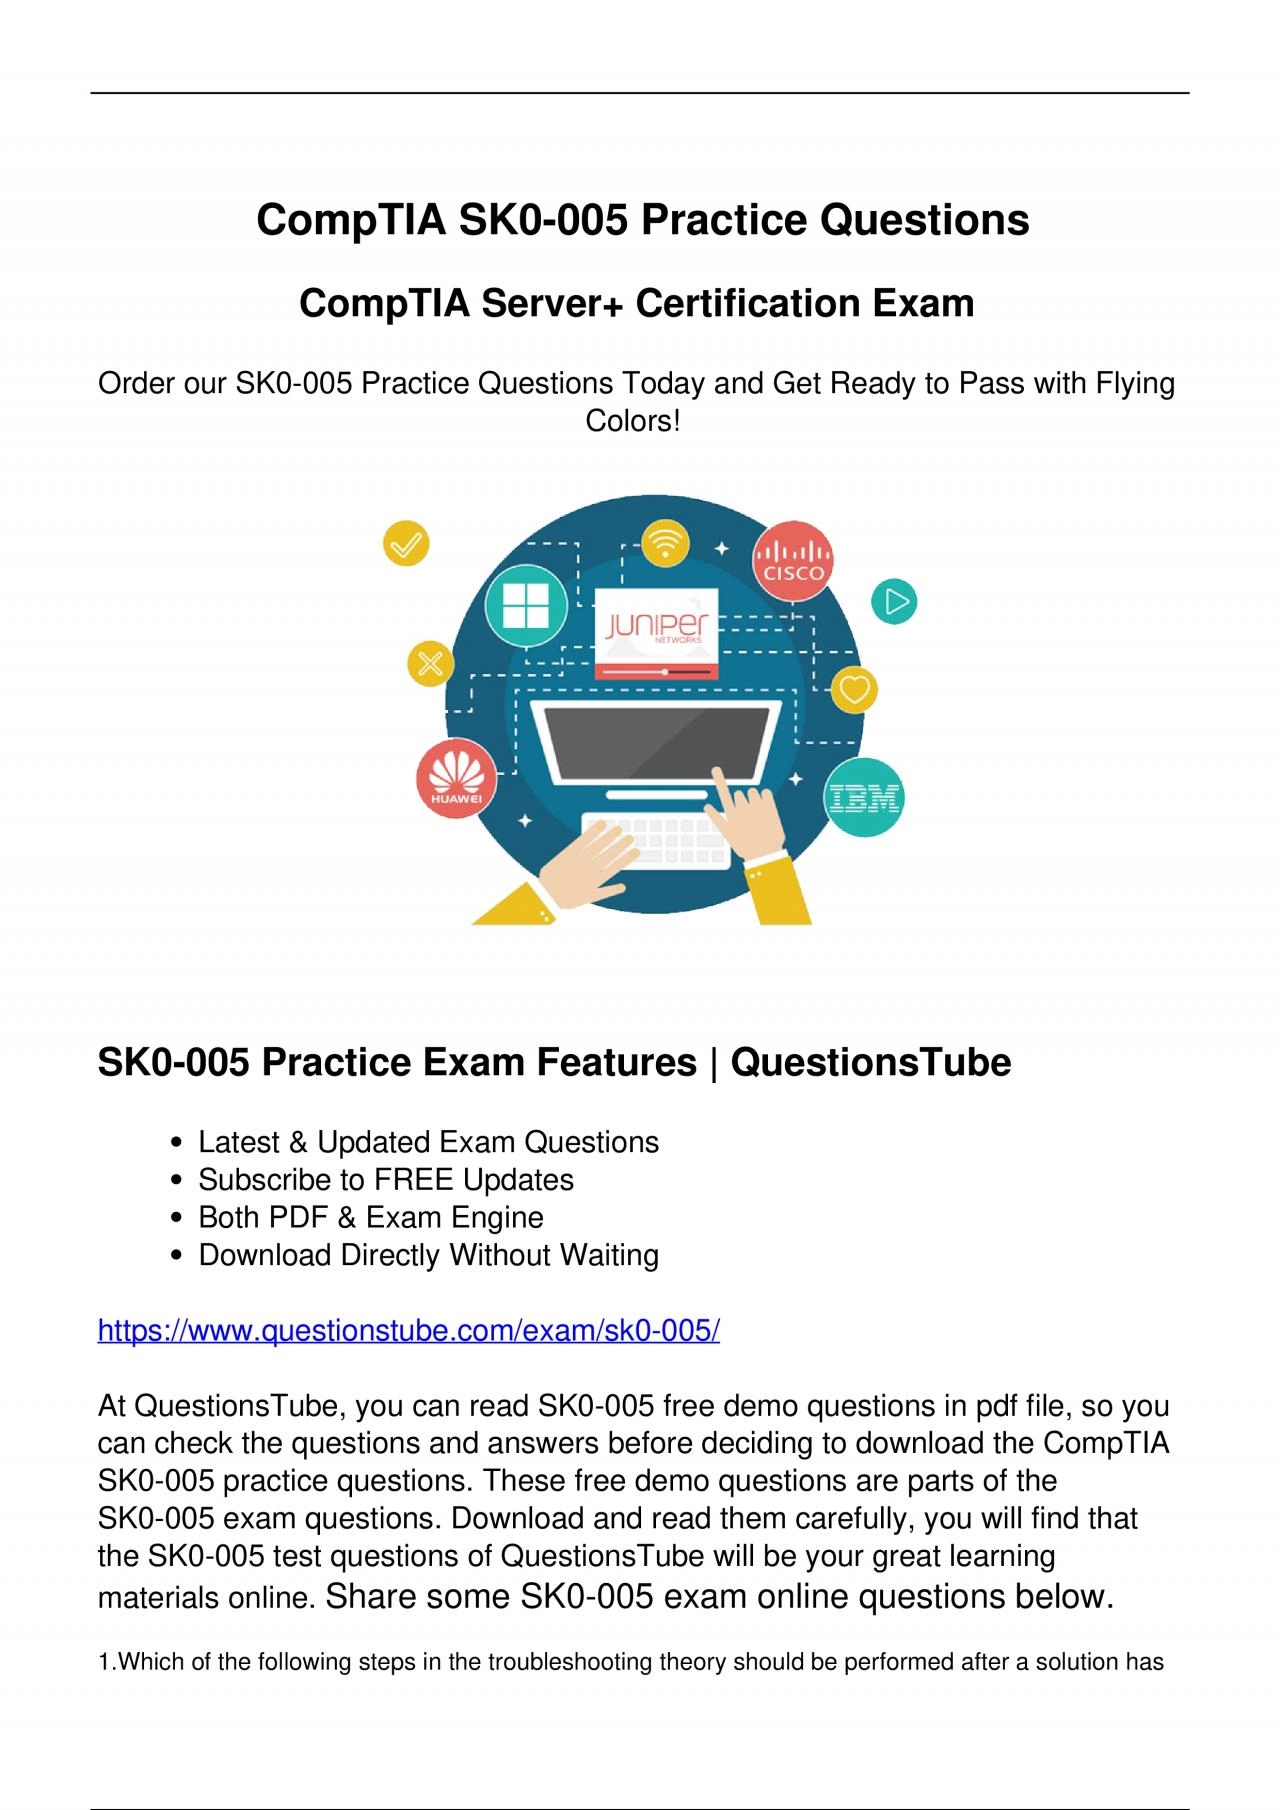 CompTIA SK0-005 Practice Questions - Pass Your SK0-005 Exam Swiftly